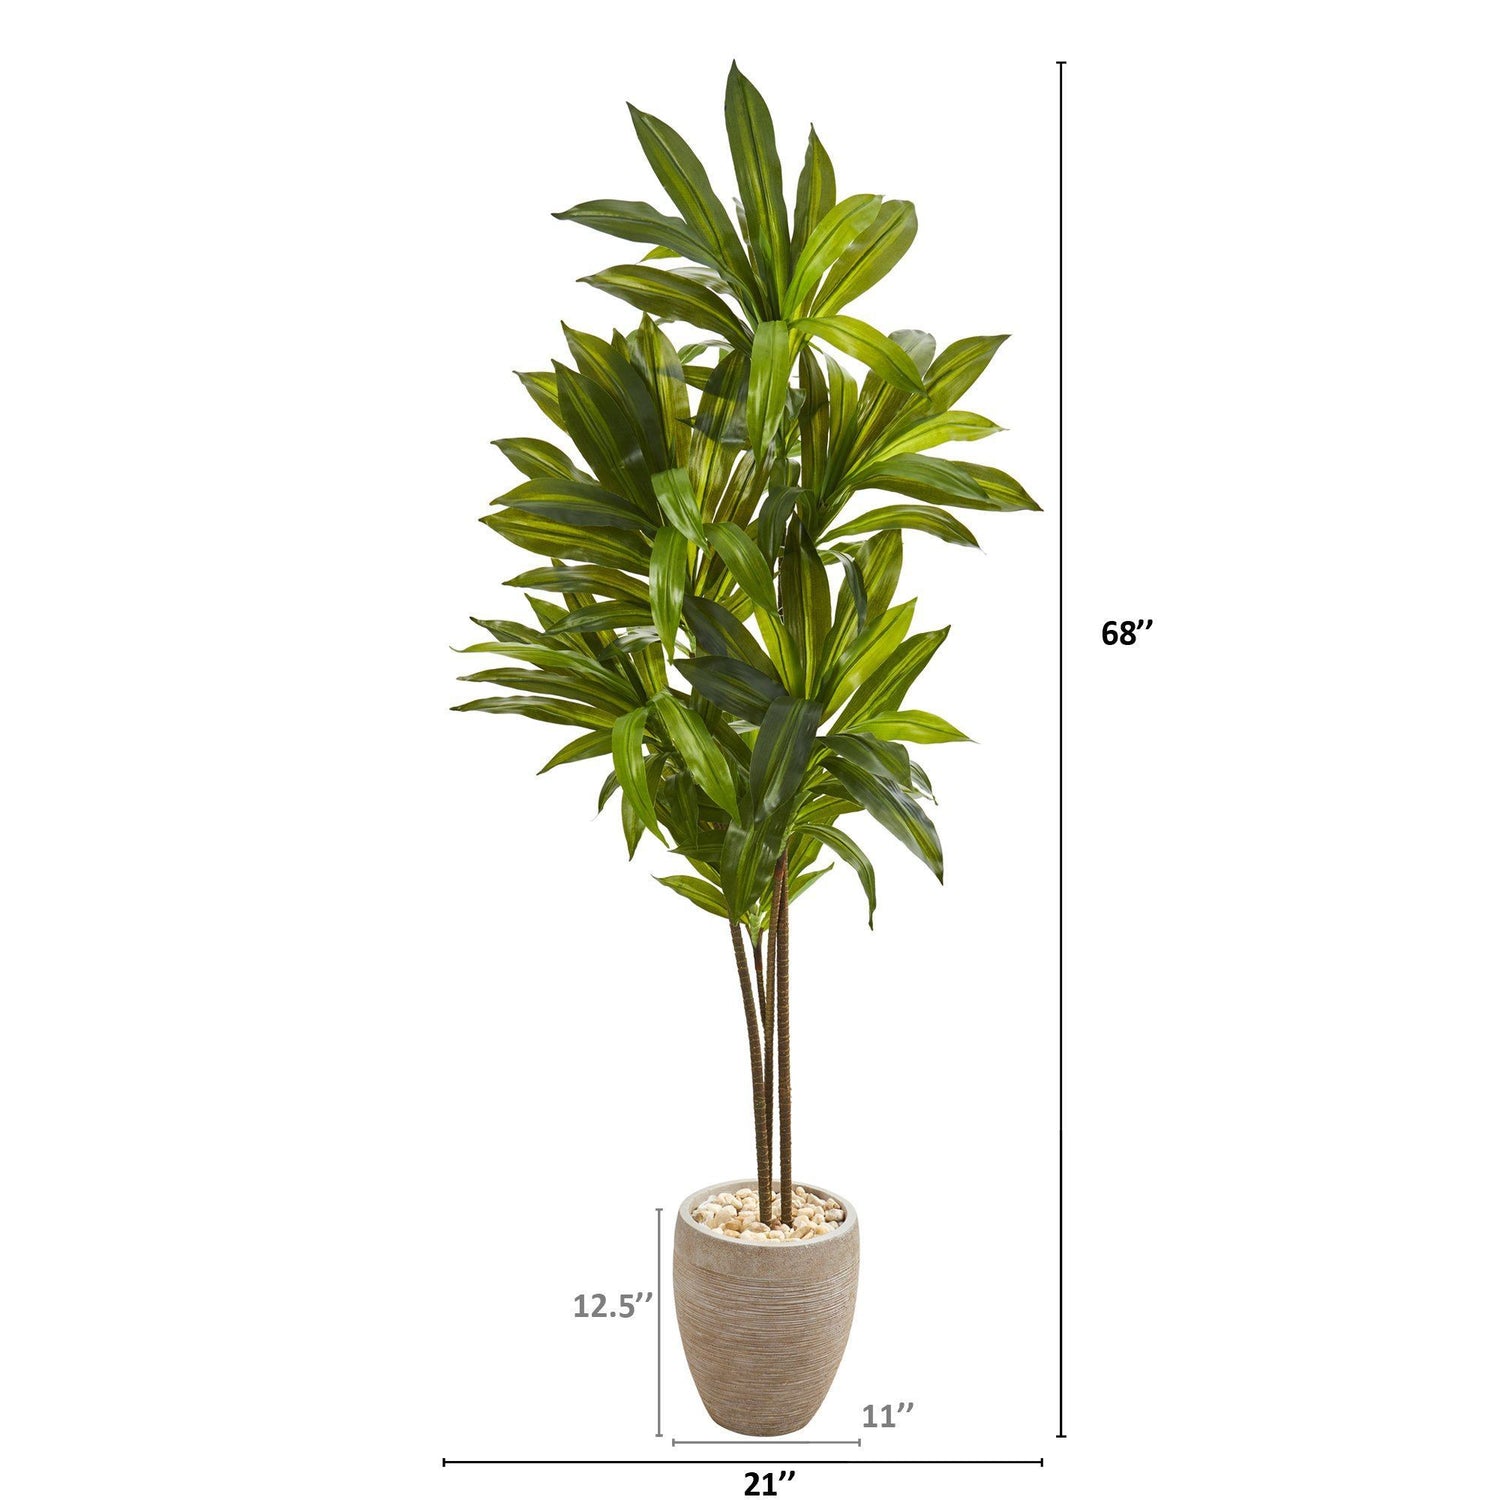 68” Dracaena Artificial Plant in Sand Colored Planter (Real Touch)